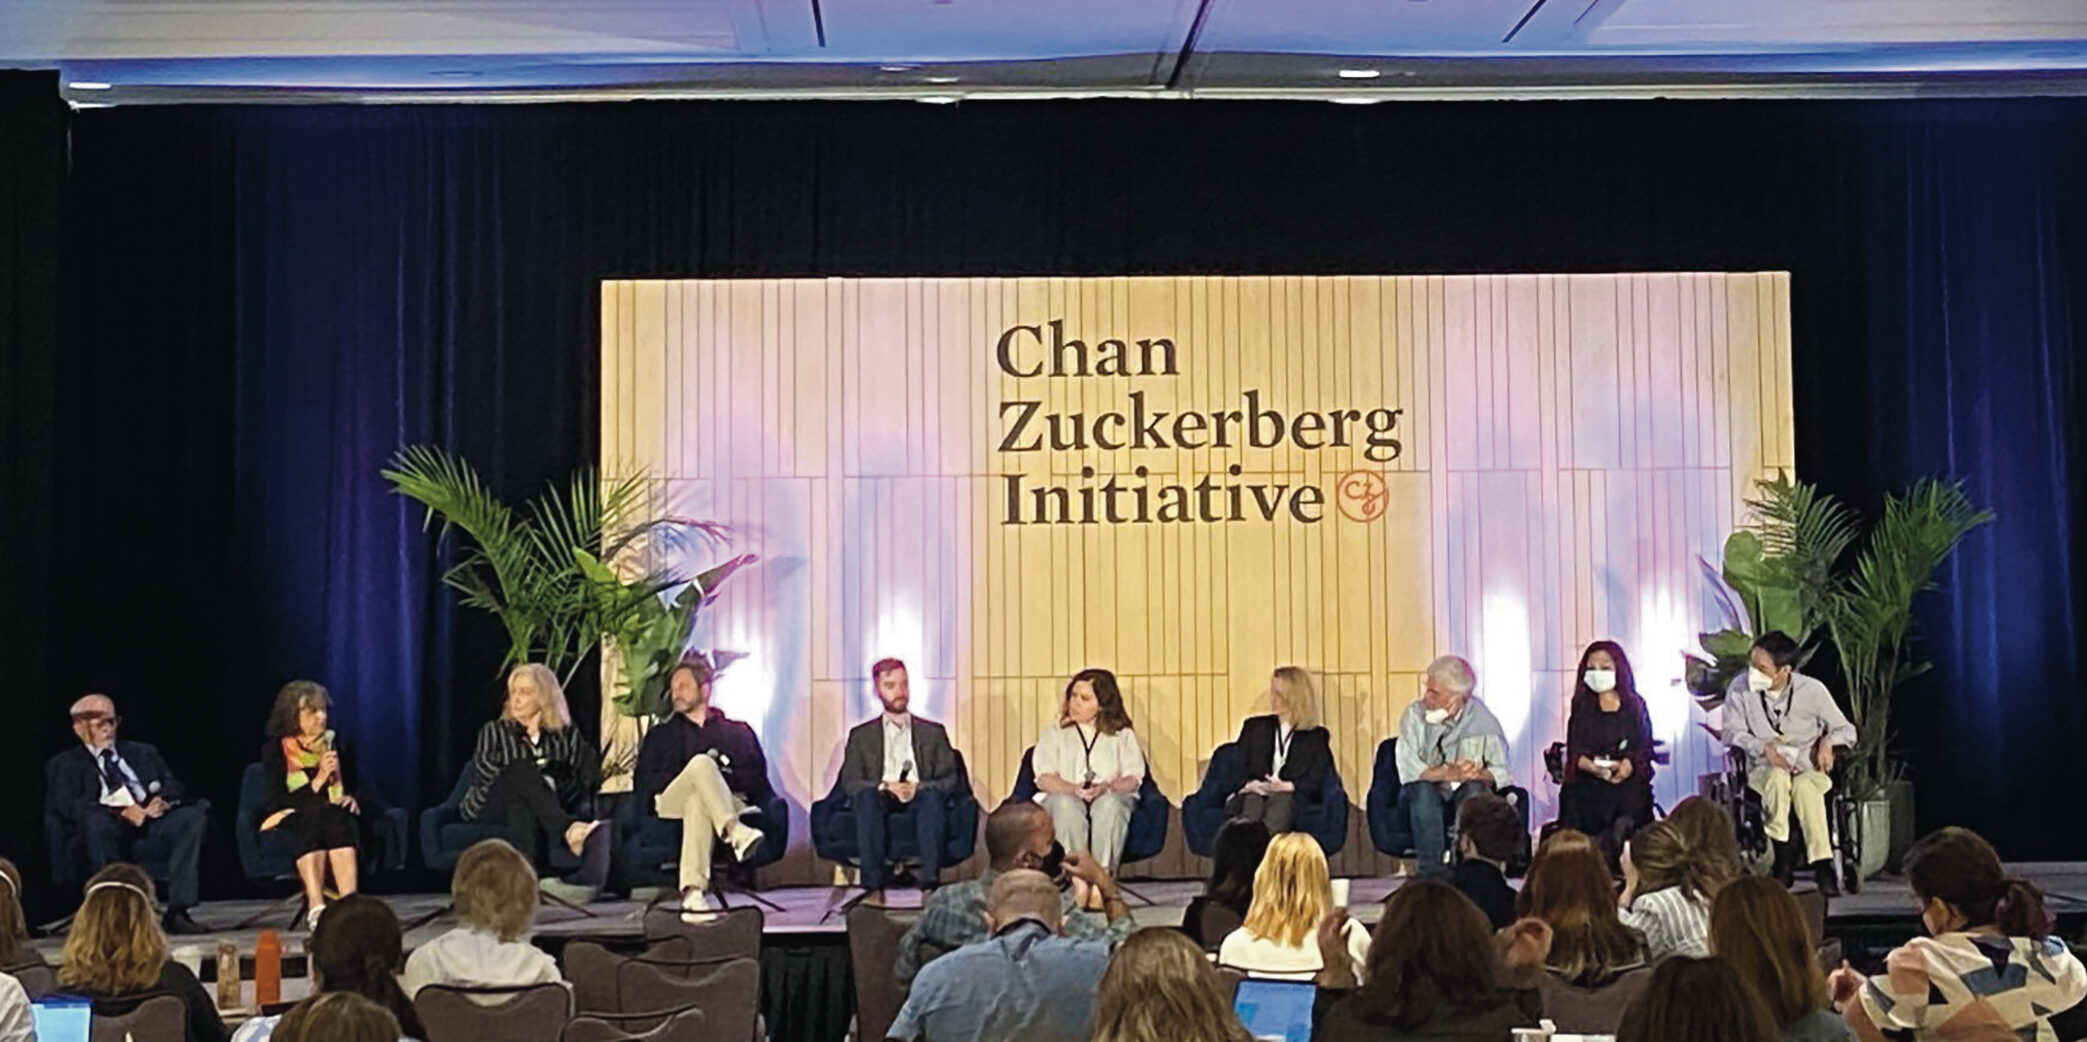 A panel of adult males and females at the Chan Zuckerberg Initiative conference sitting down engaged in a discussion on stage. Two individuals are seated in wheelchairs, several are wearing face masks and holding microphones.